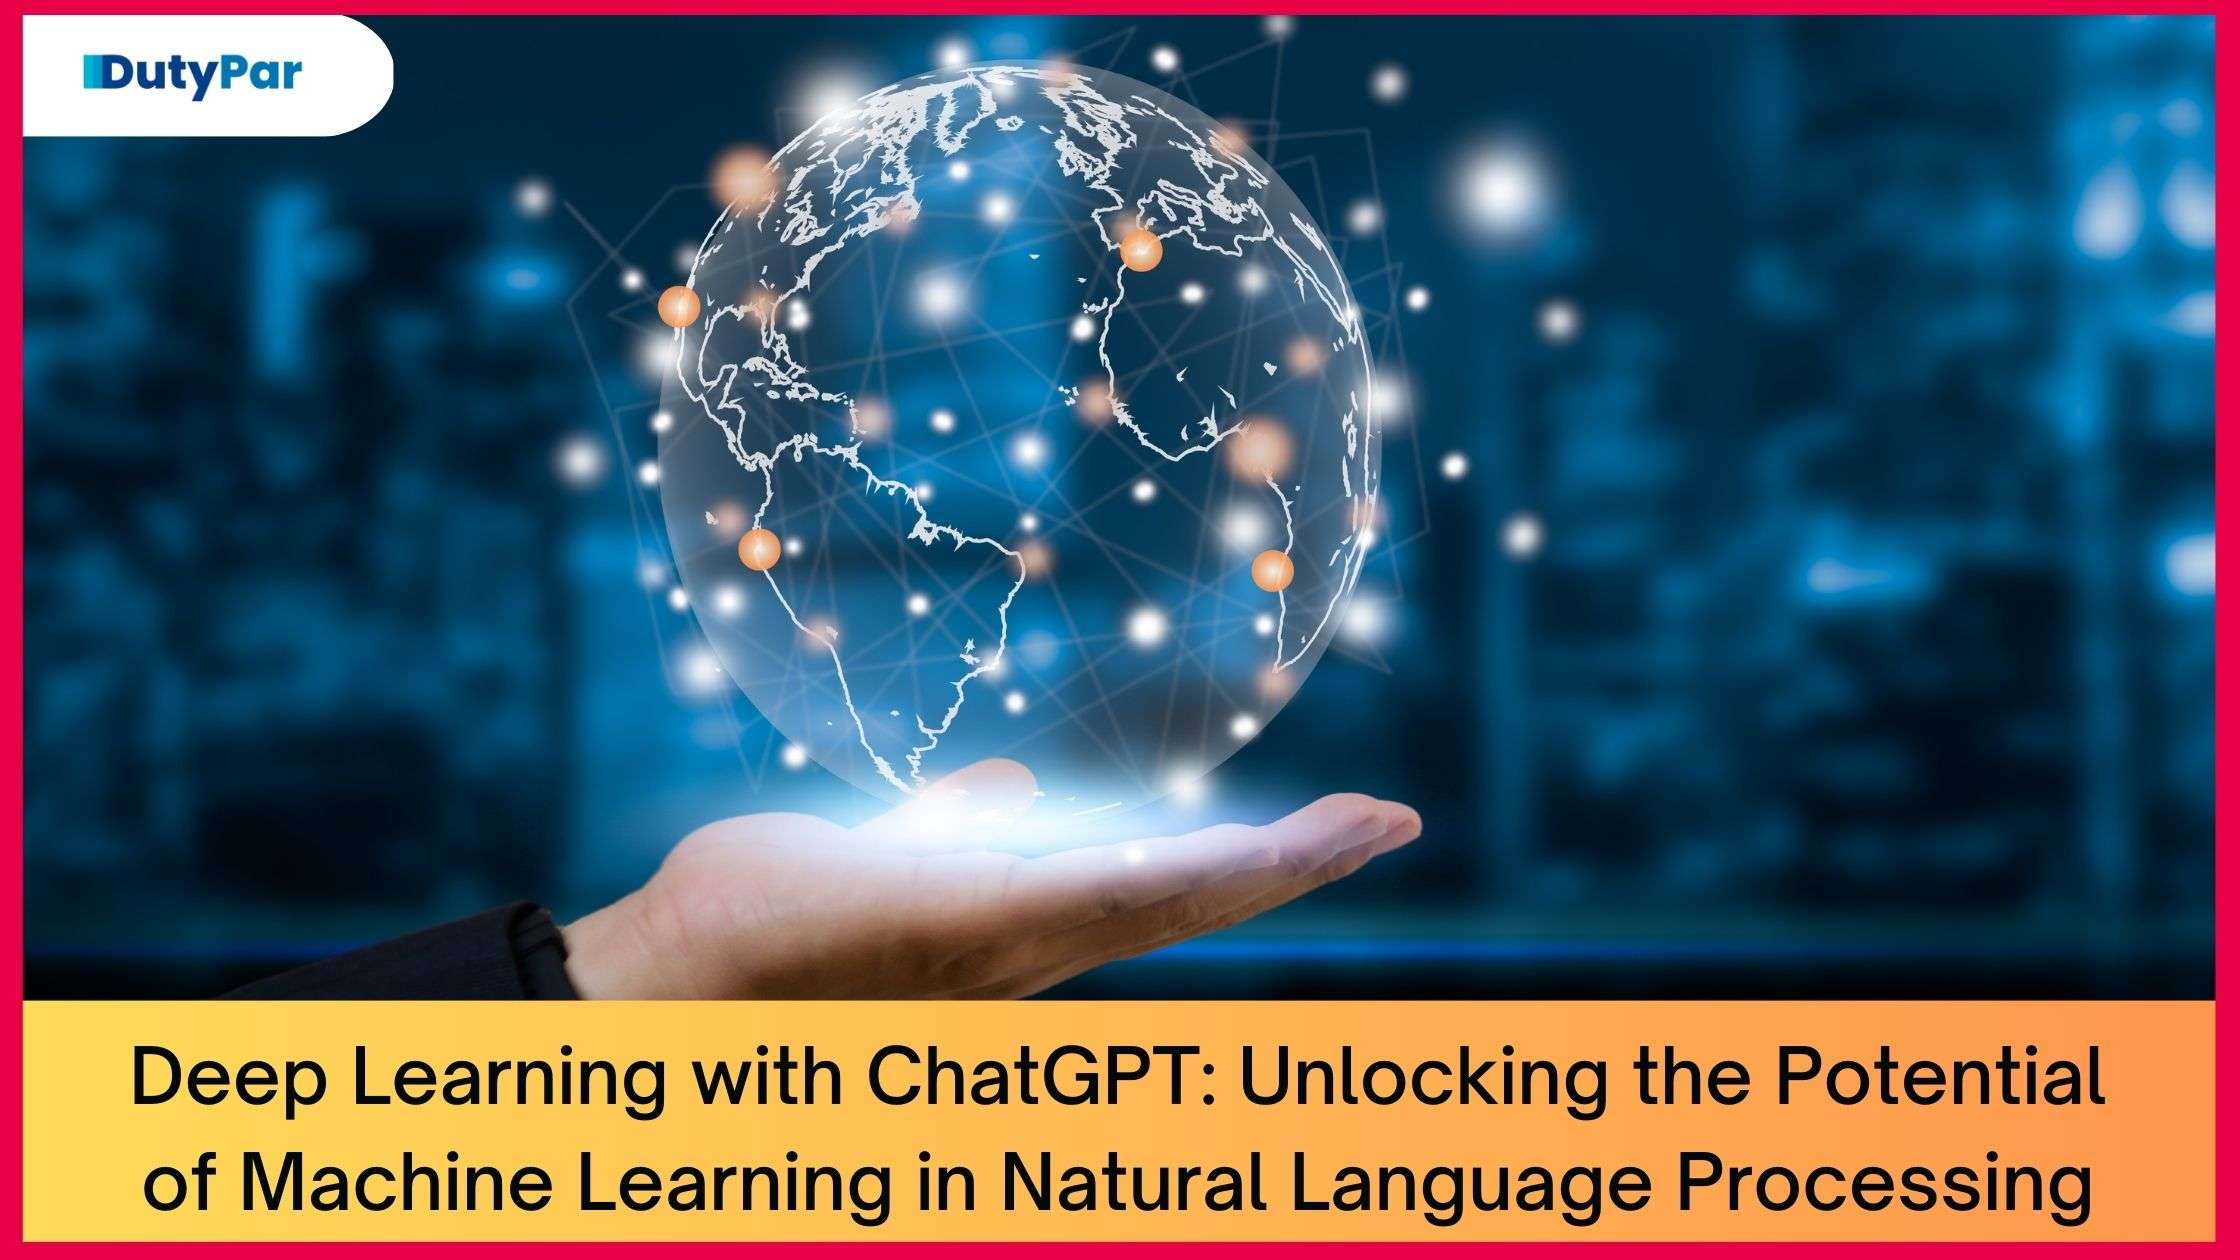 Deep Learning with ChatGPT: Unlocking the Potential of Machine Learning in Natural Language Processing